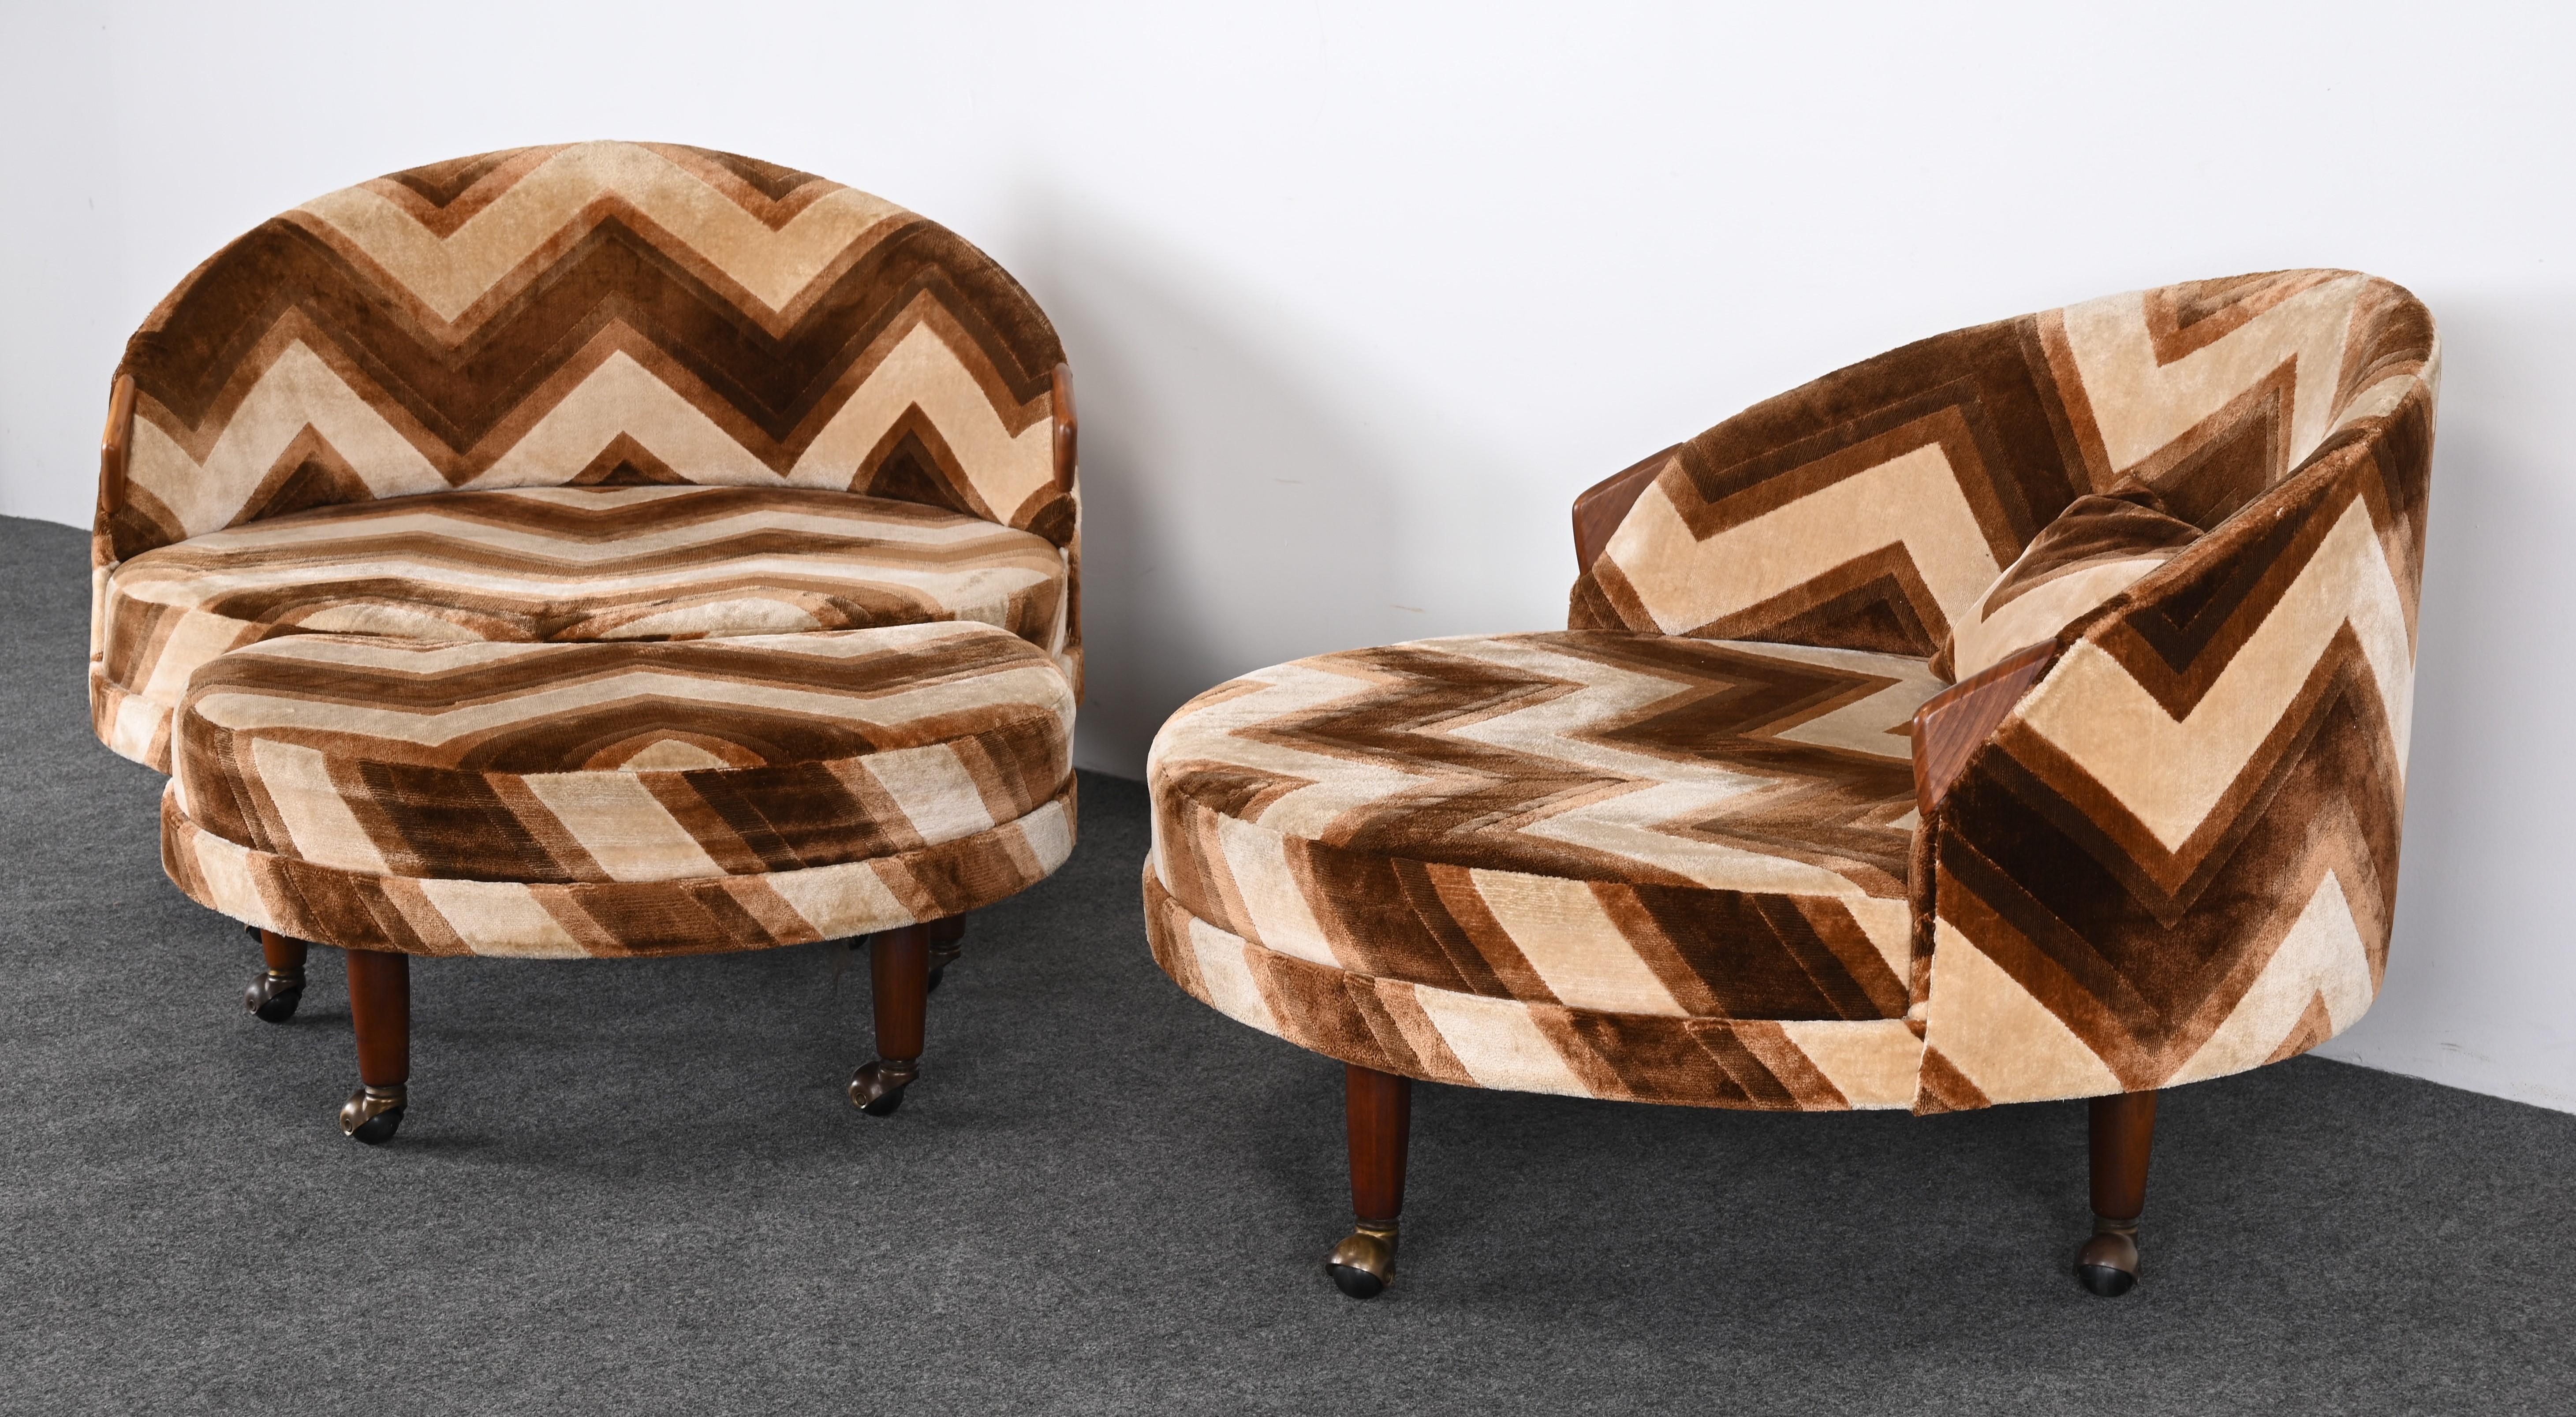 American Pair of Adrian Pearsall Havana Lounge Chairs and Ottoman, 1965 For Sale